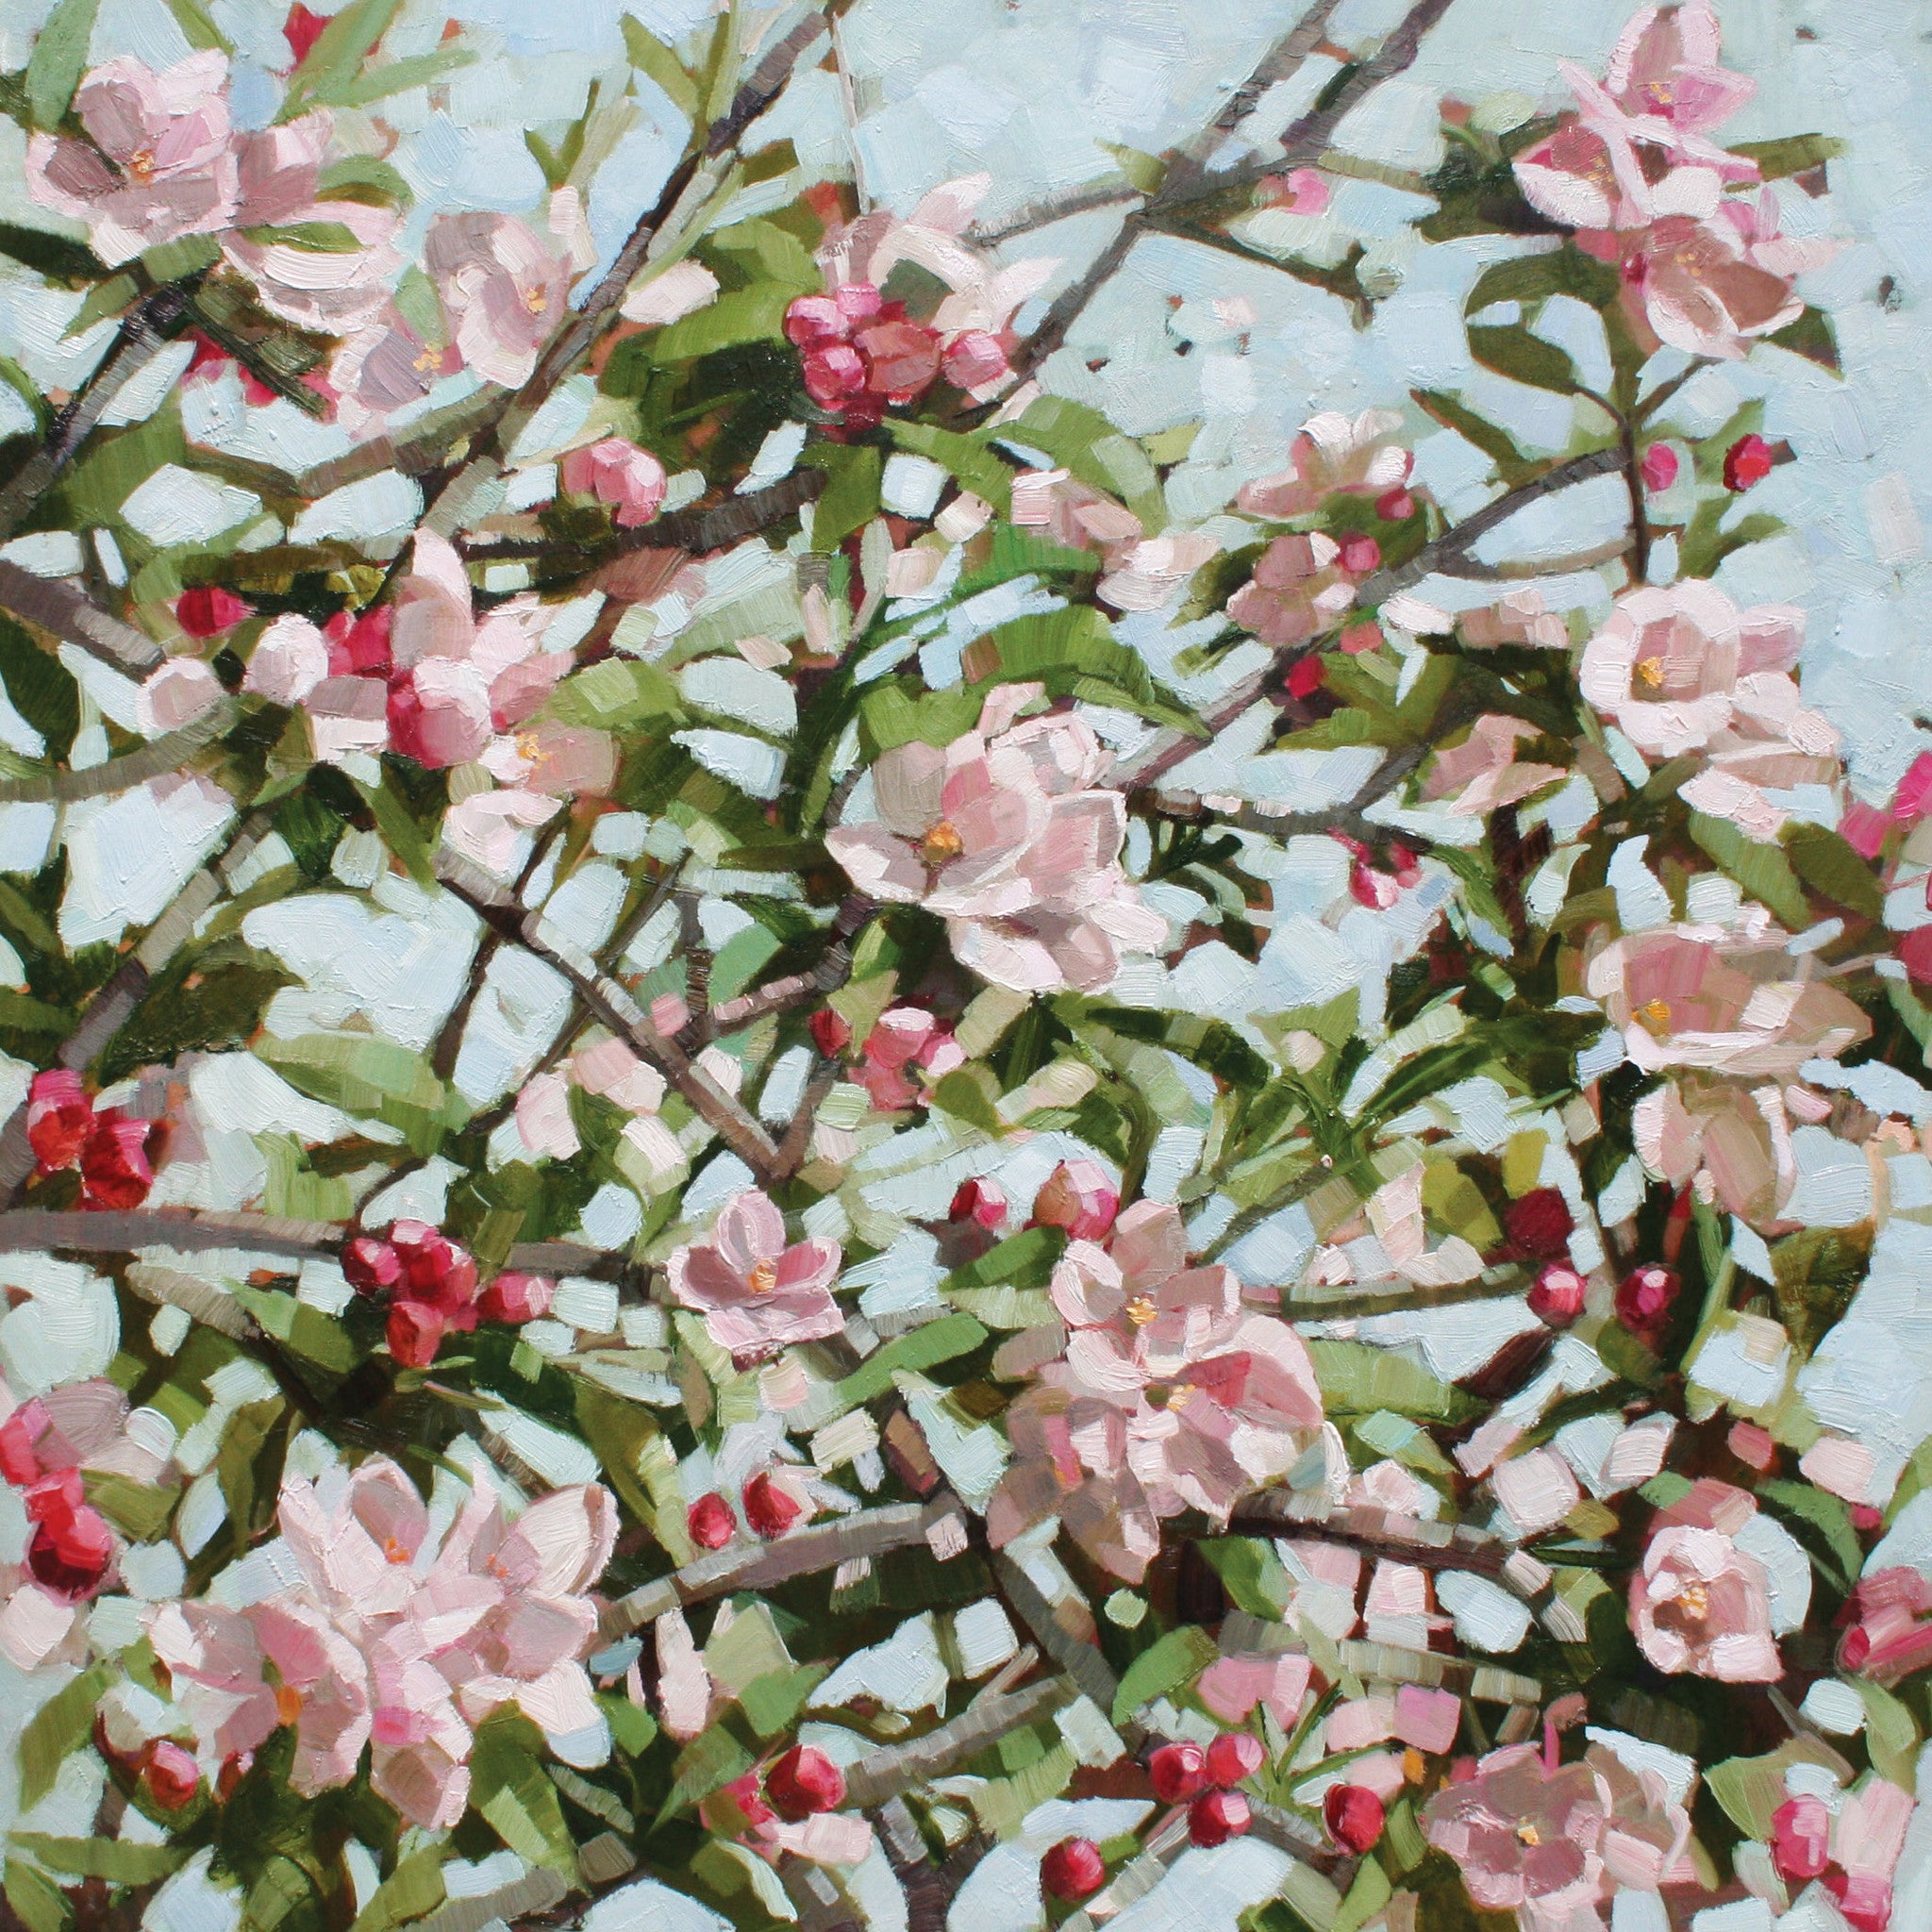 Apple Blossom by Anne-Marie Butlin, Fine Art Greeting Card, Oil on Canvas, Apple blossom